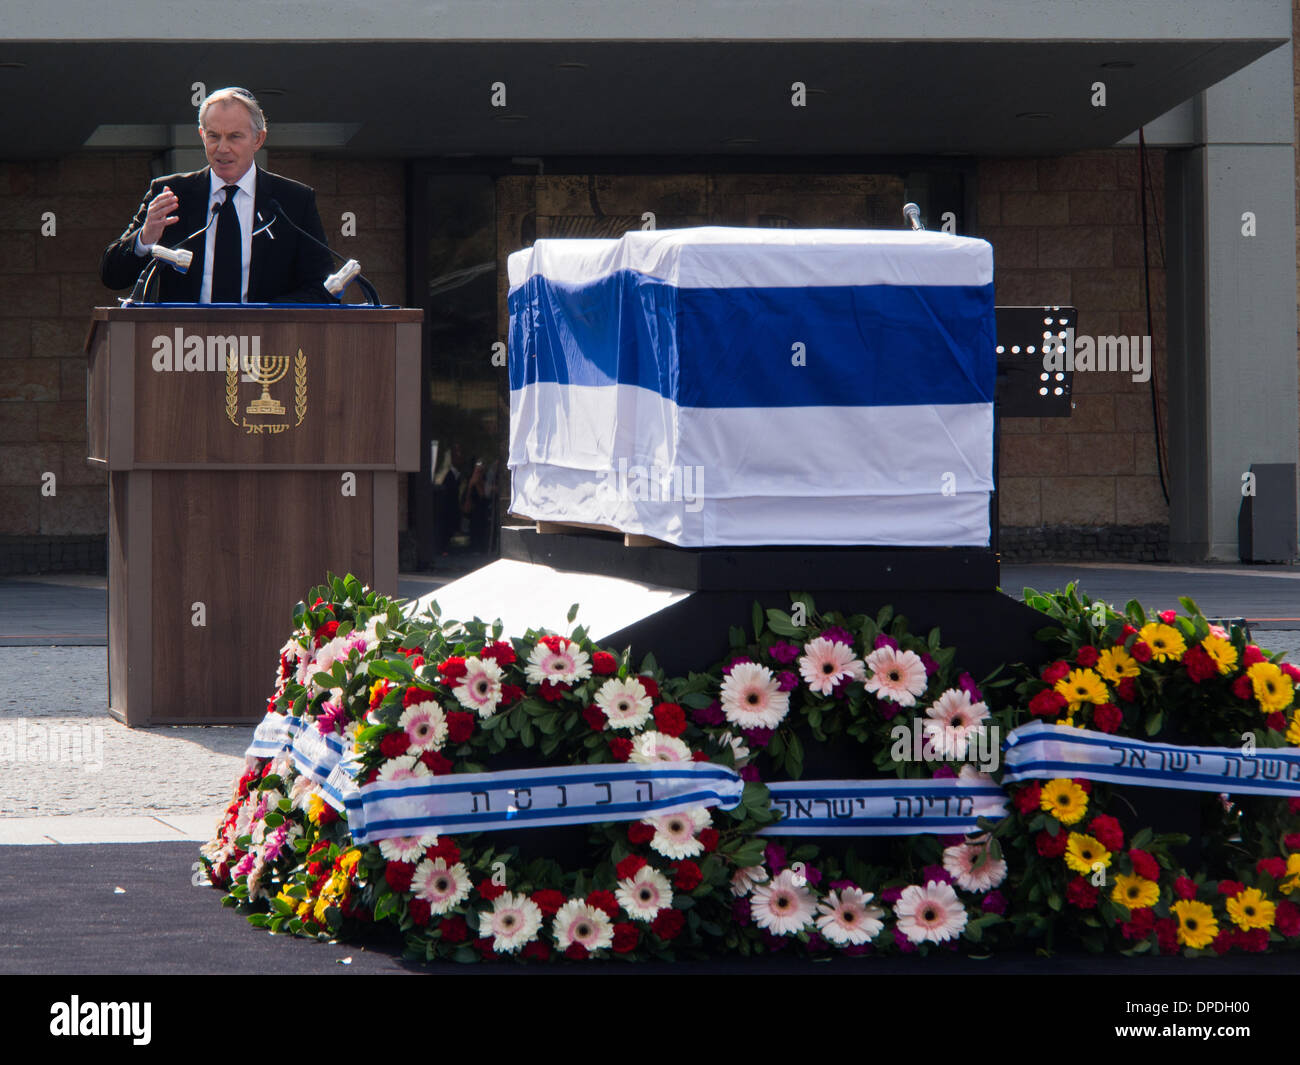 Former British PM, Tony Blair, delivers a eulogy for former Israeli Prime Minister, Ariel Sharon, at a state memorial ceremony in the Knesset plaza. Over twenty international delegations attended the ceremony, paying last respects to Sharon. Jerusalem, Israel. 13-Jan-2014.  A state memorial ceremony was held at the Knesset for Former PM Ariel Sharon. President Peres, PM Netanyahu, Knesset Speaker Edelstein, US Vice President Biden and former British PM Blair delivered eulogies. Sharon passed away Saturday at age 85. Stock Photo